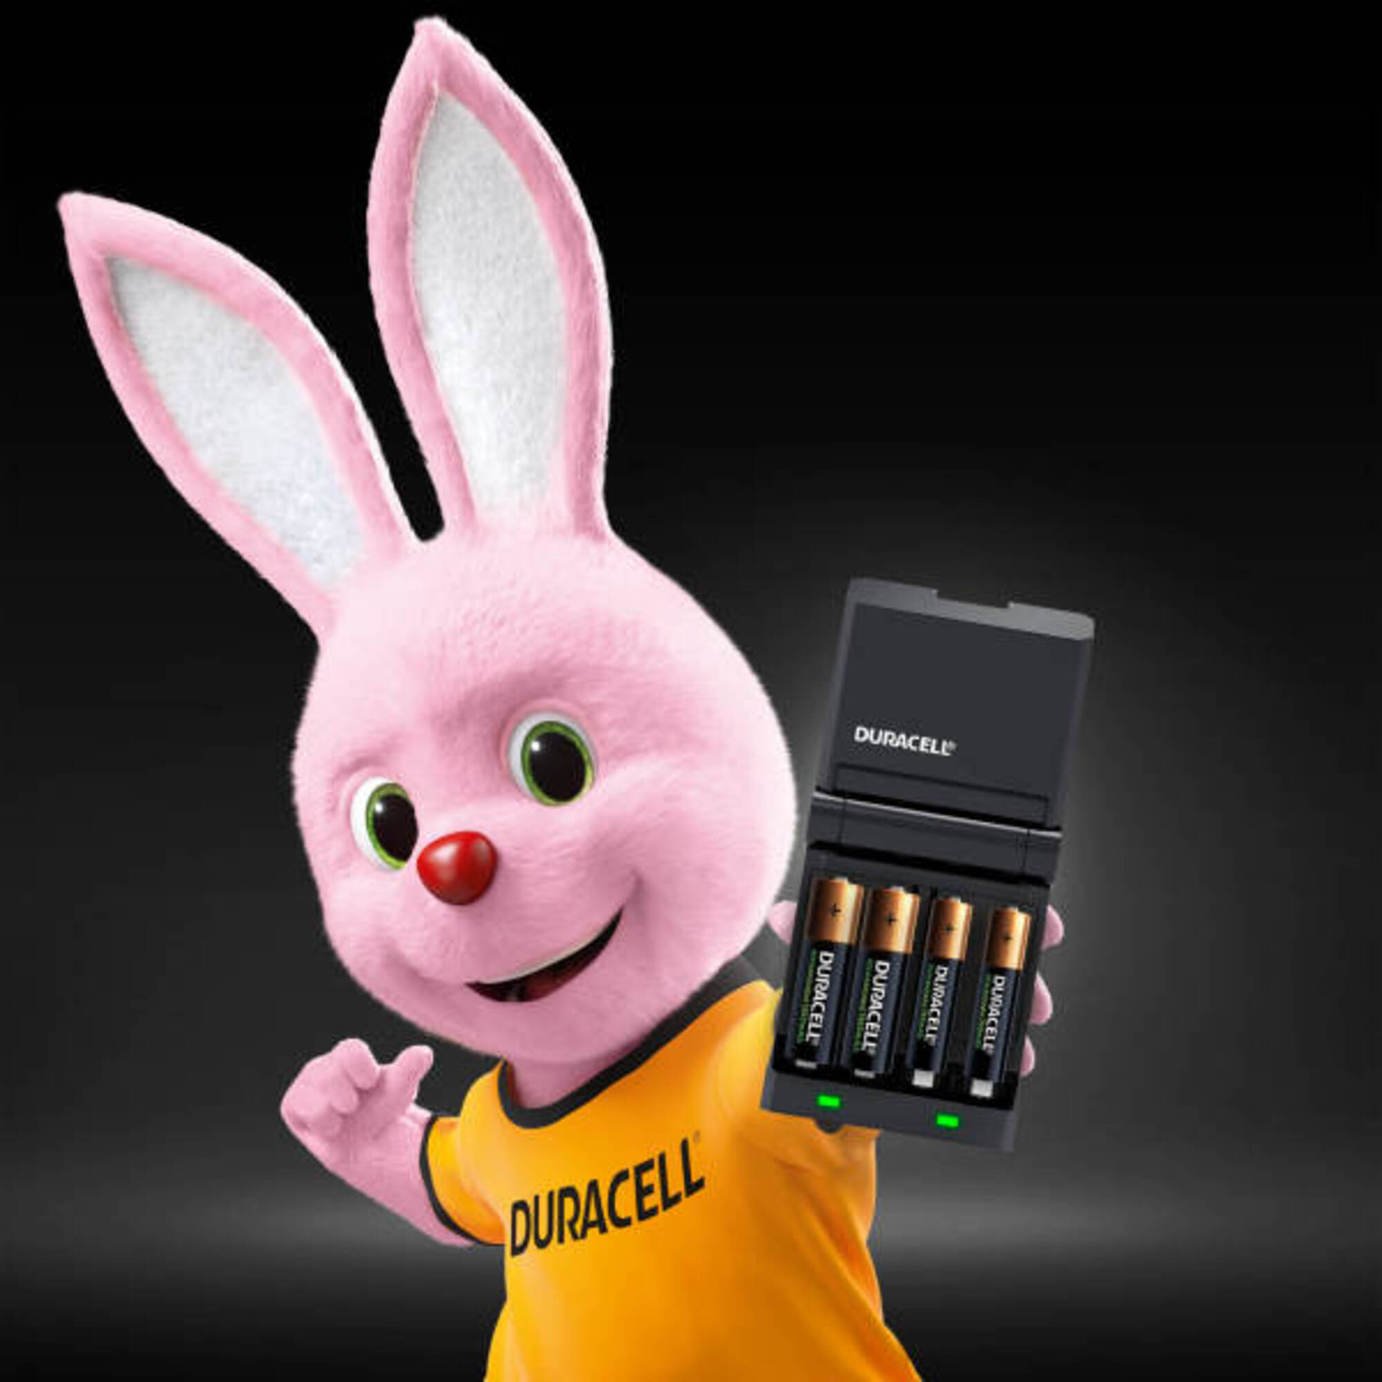 Duracell 45 Minutes Battery Charger with 2 AA and 2 AAA Review